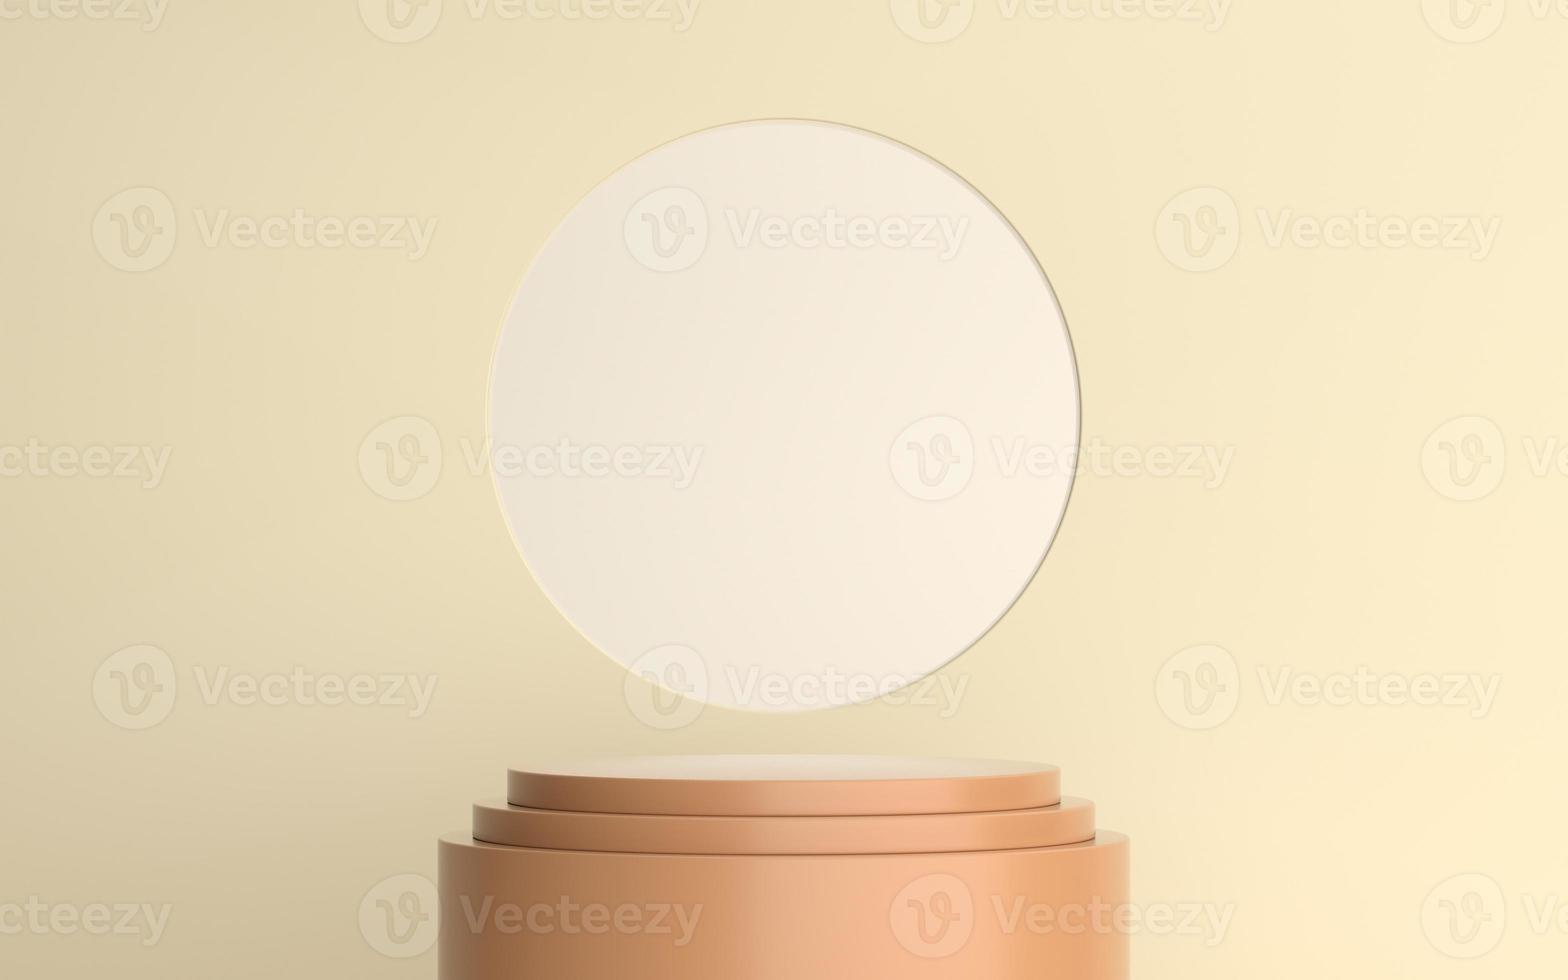 Product pedestal or stage with yellow colors for product showcase photo